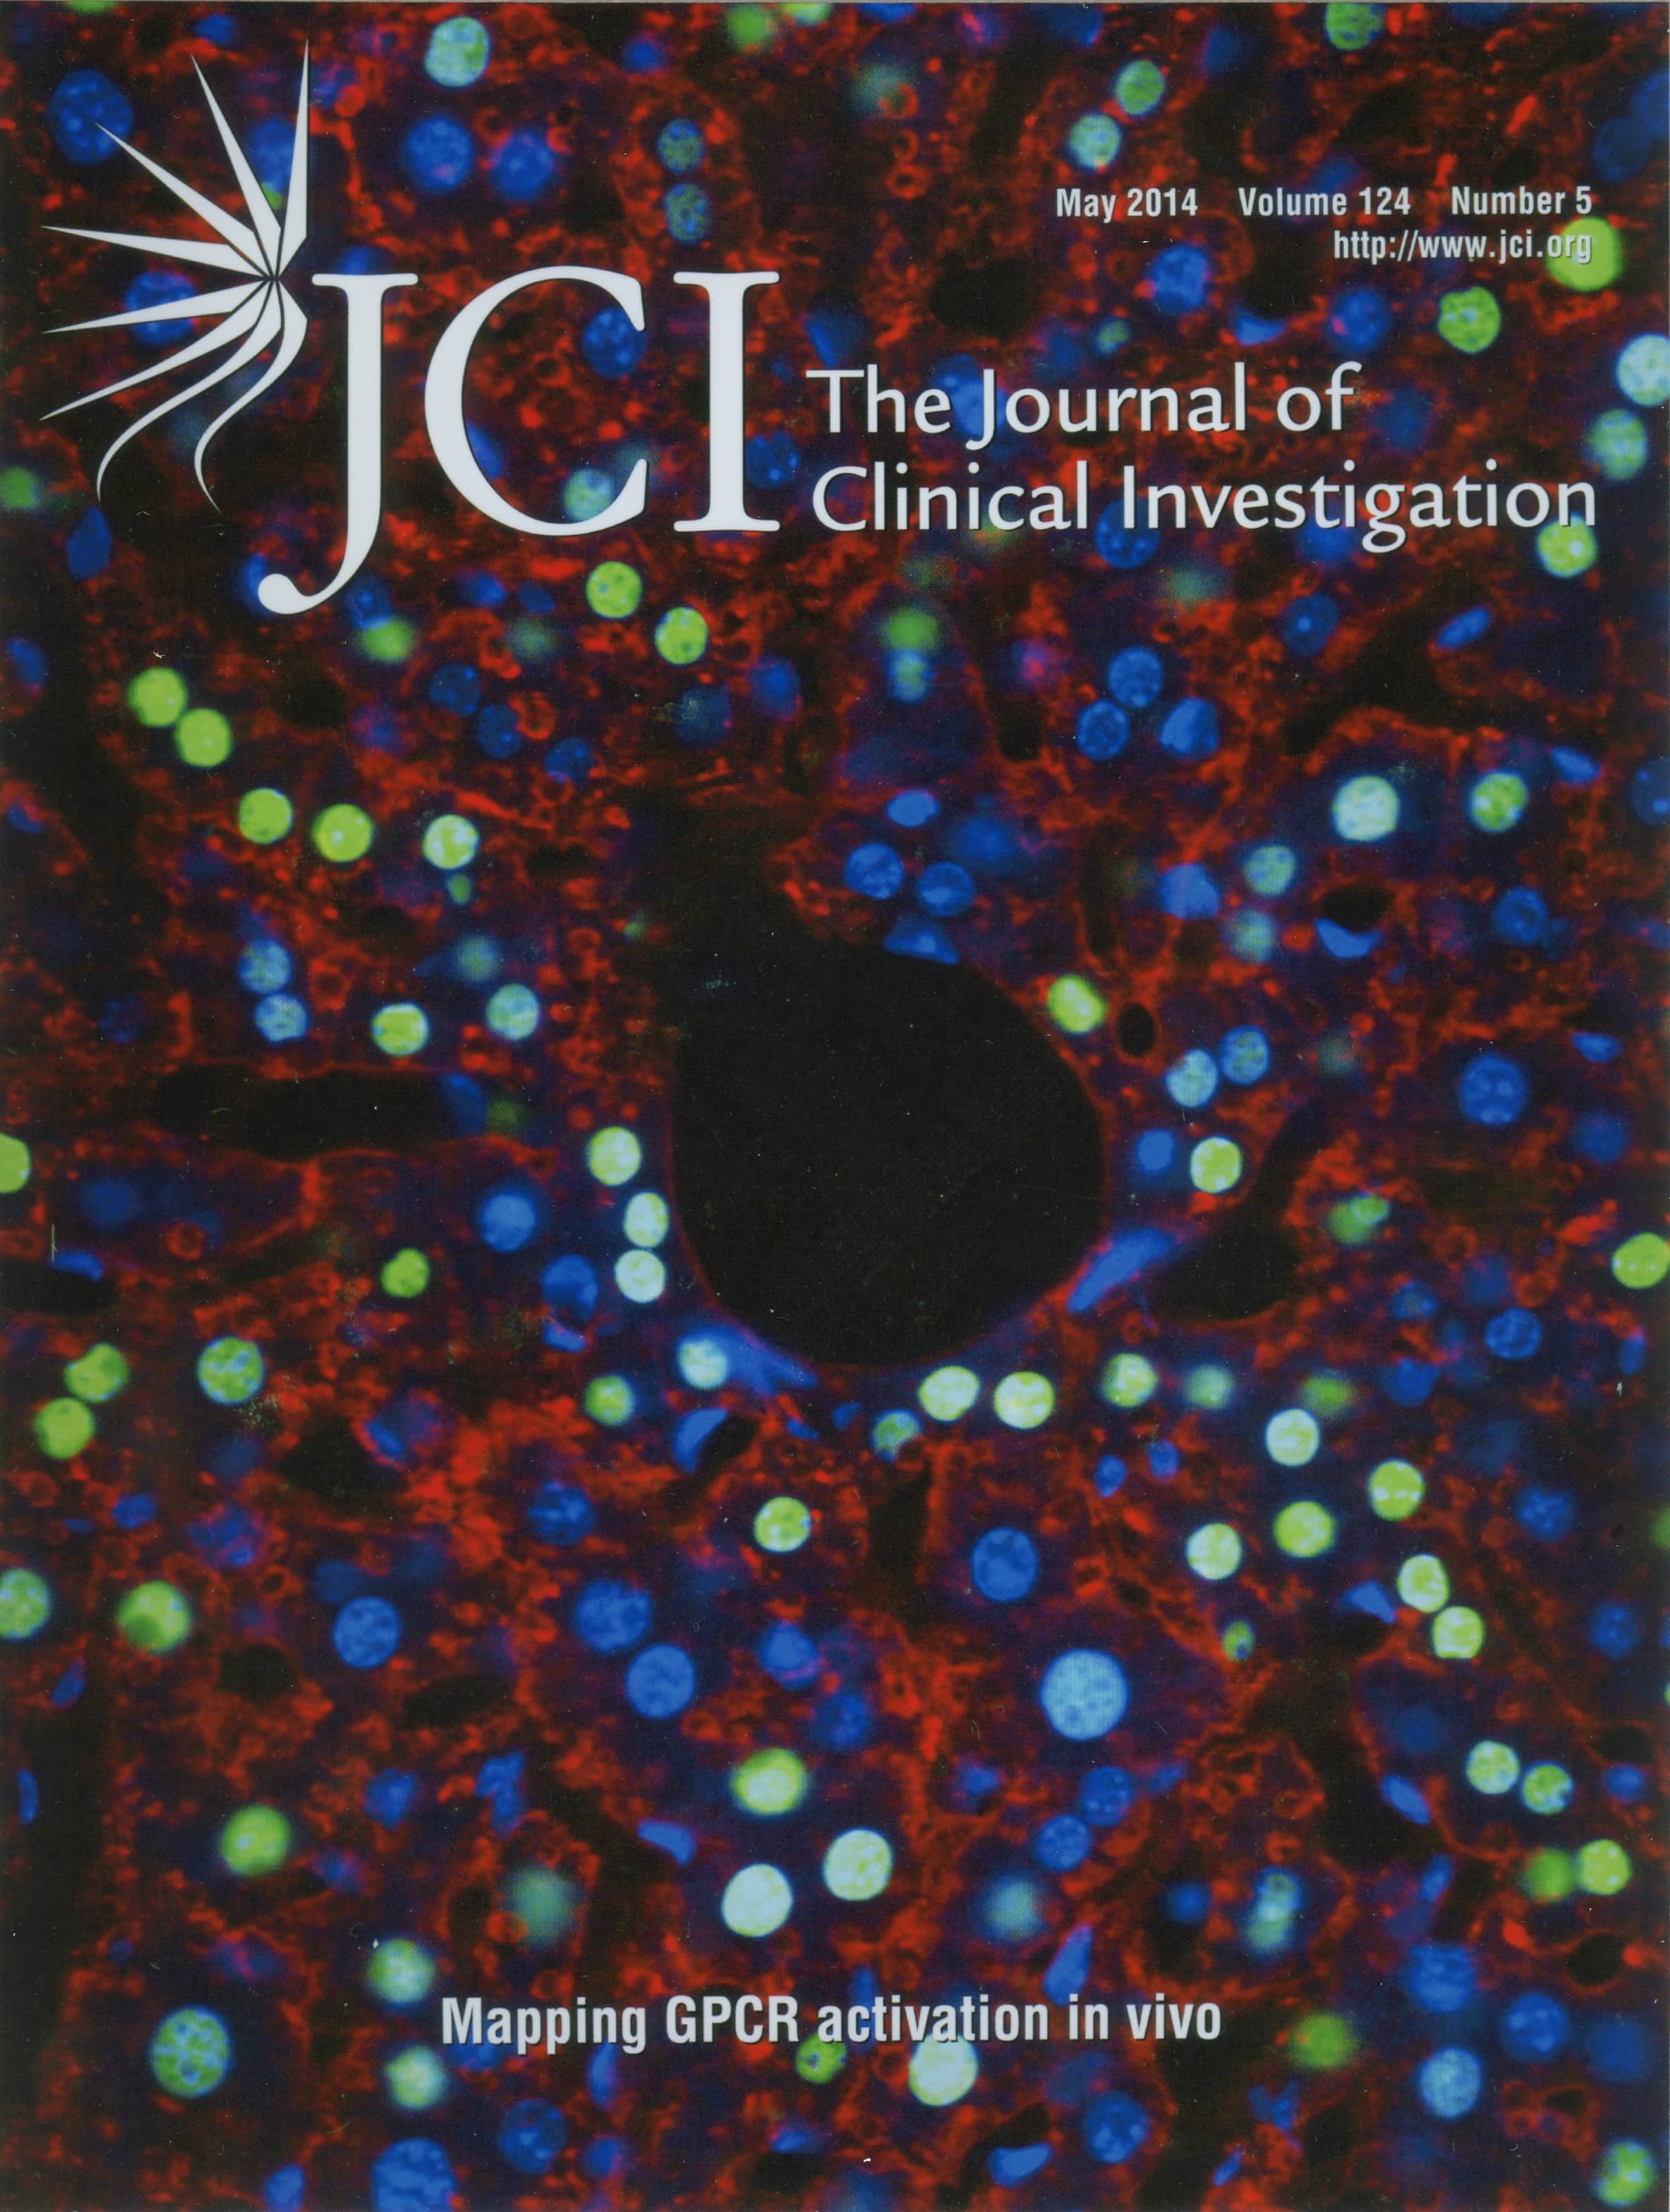 2014 cover of the Journal of Clinical Investigation.